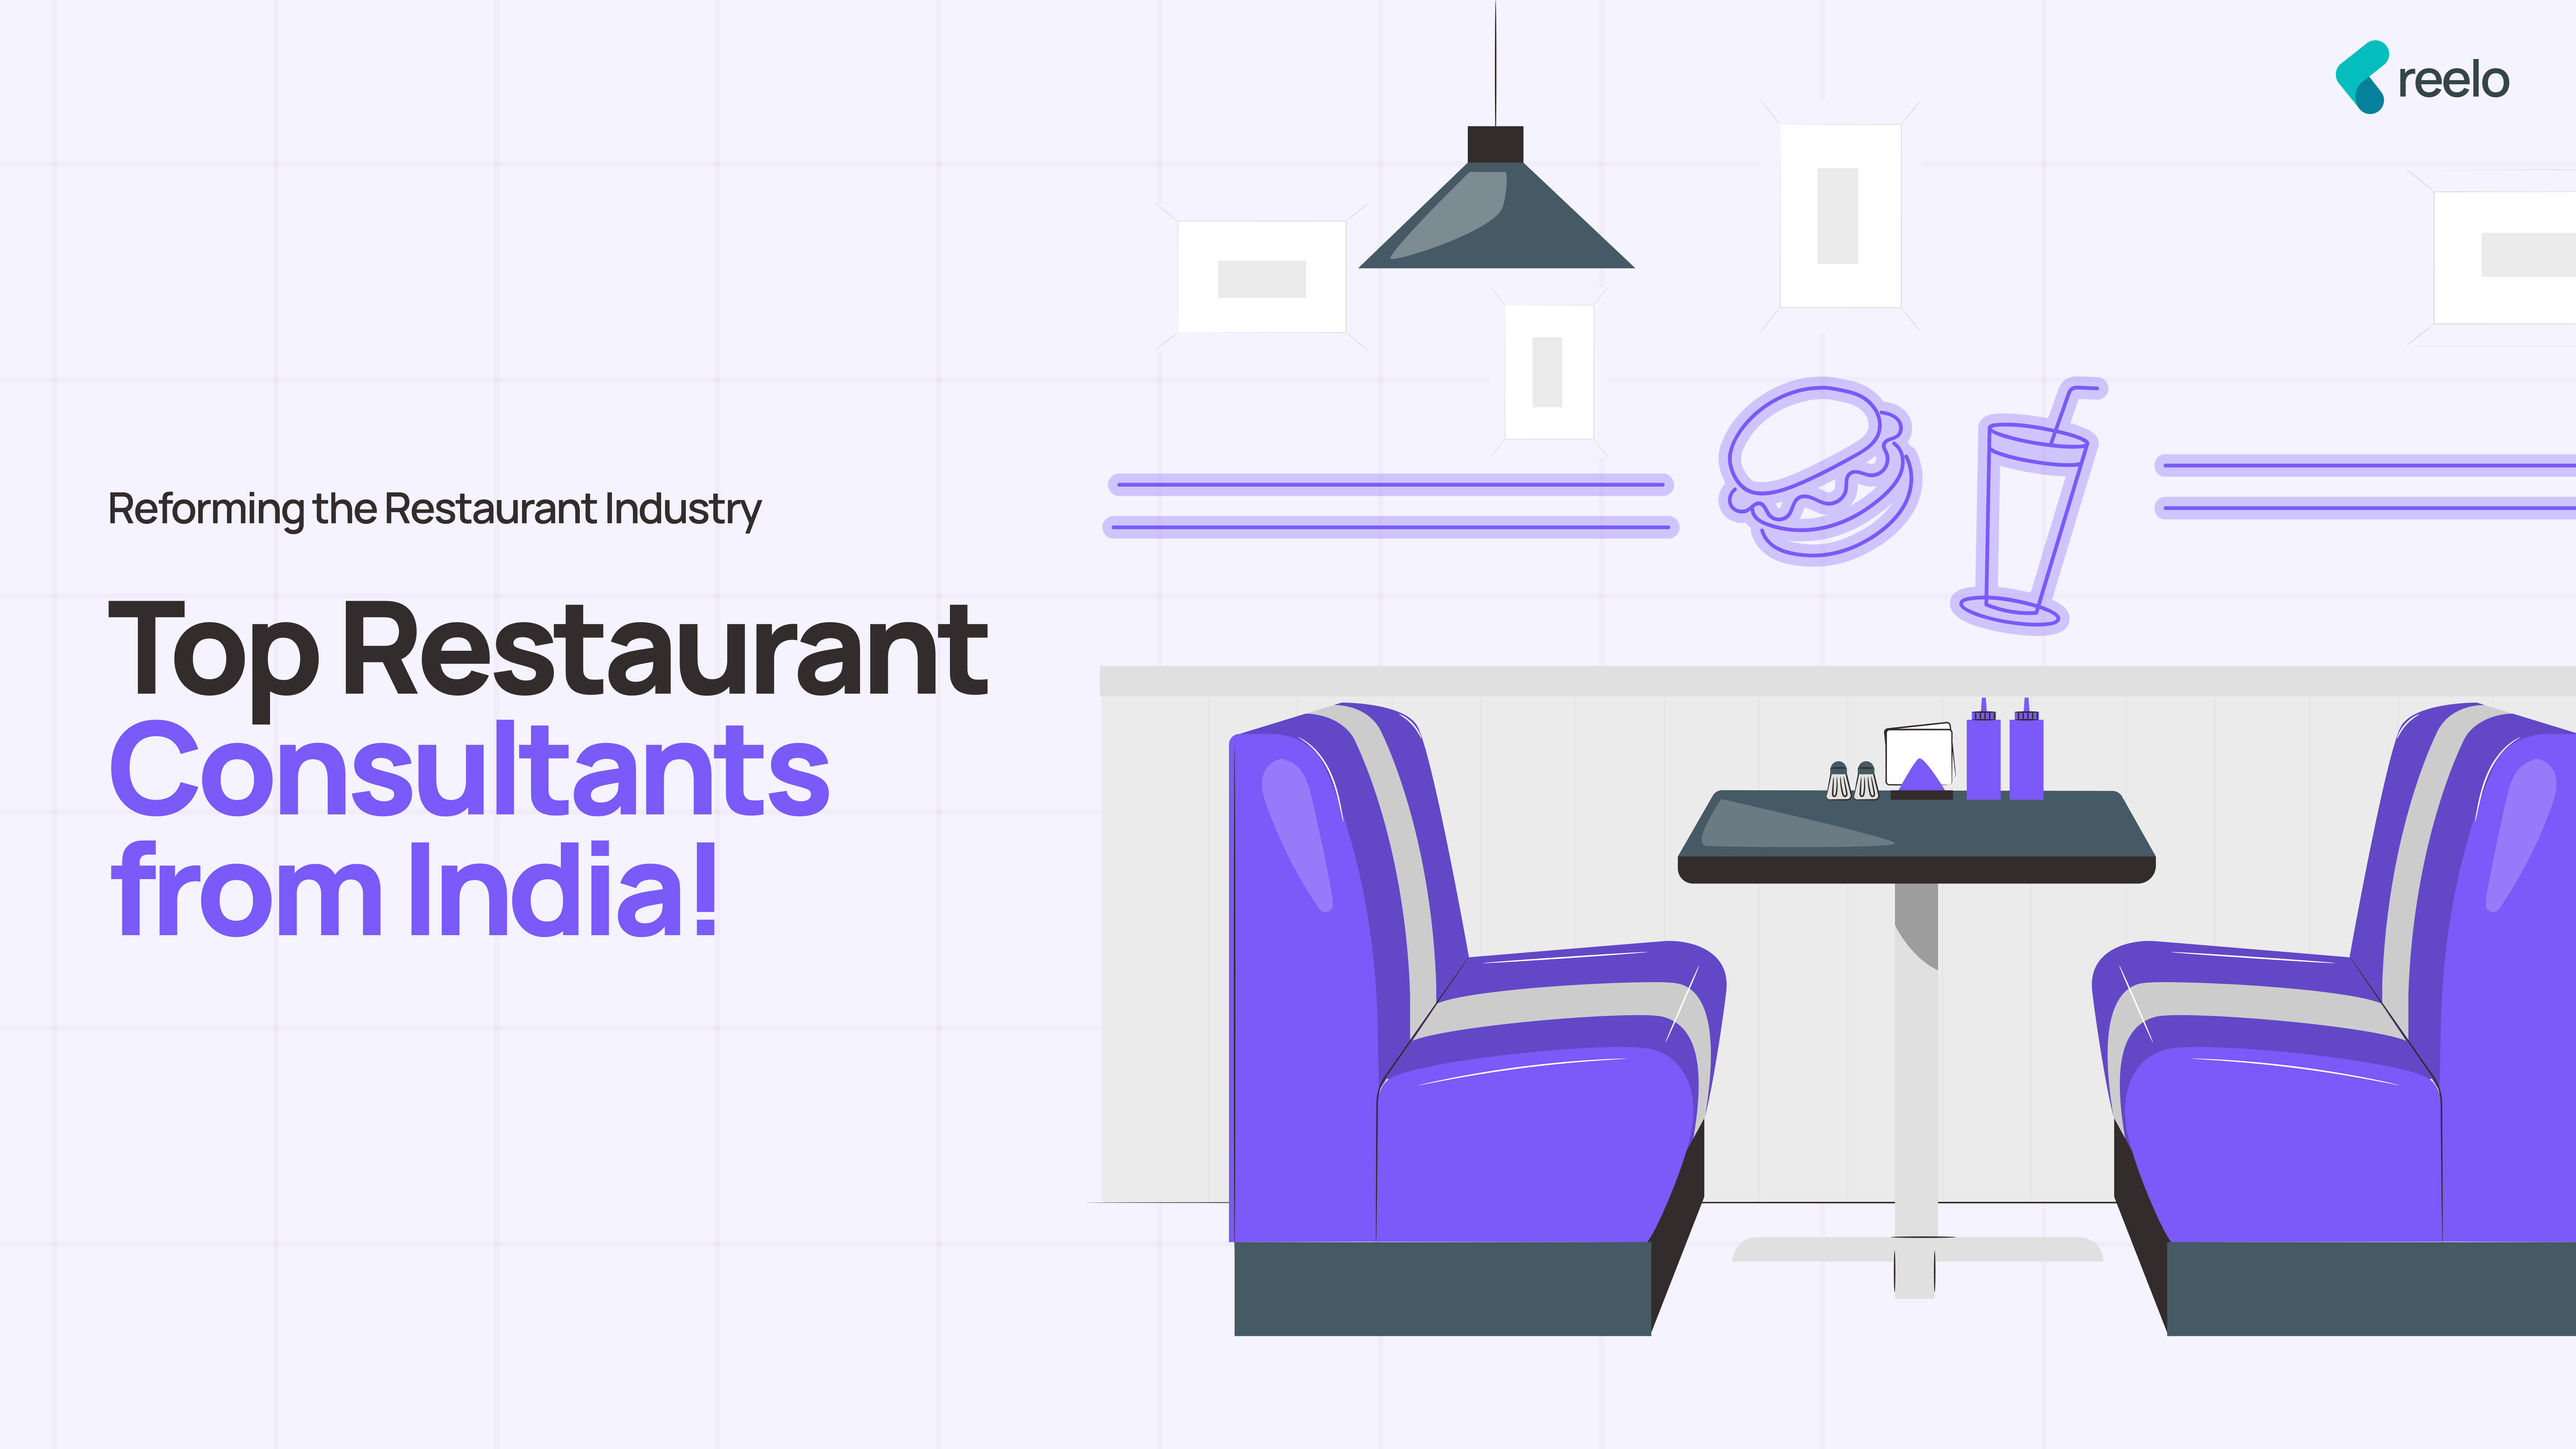 Top restaurant consultants from India